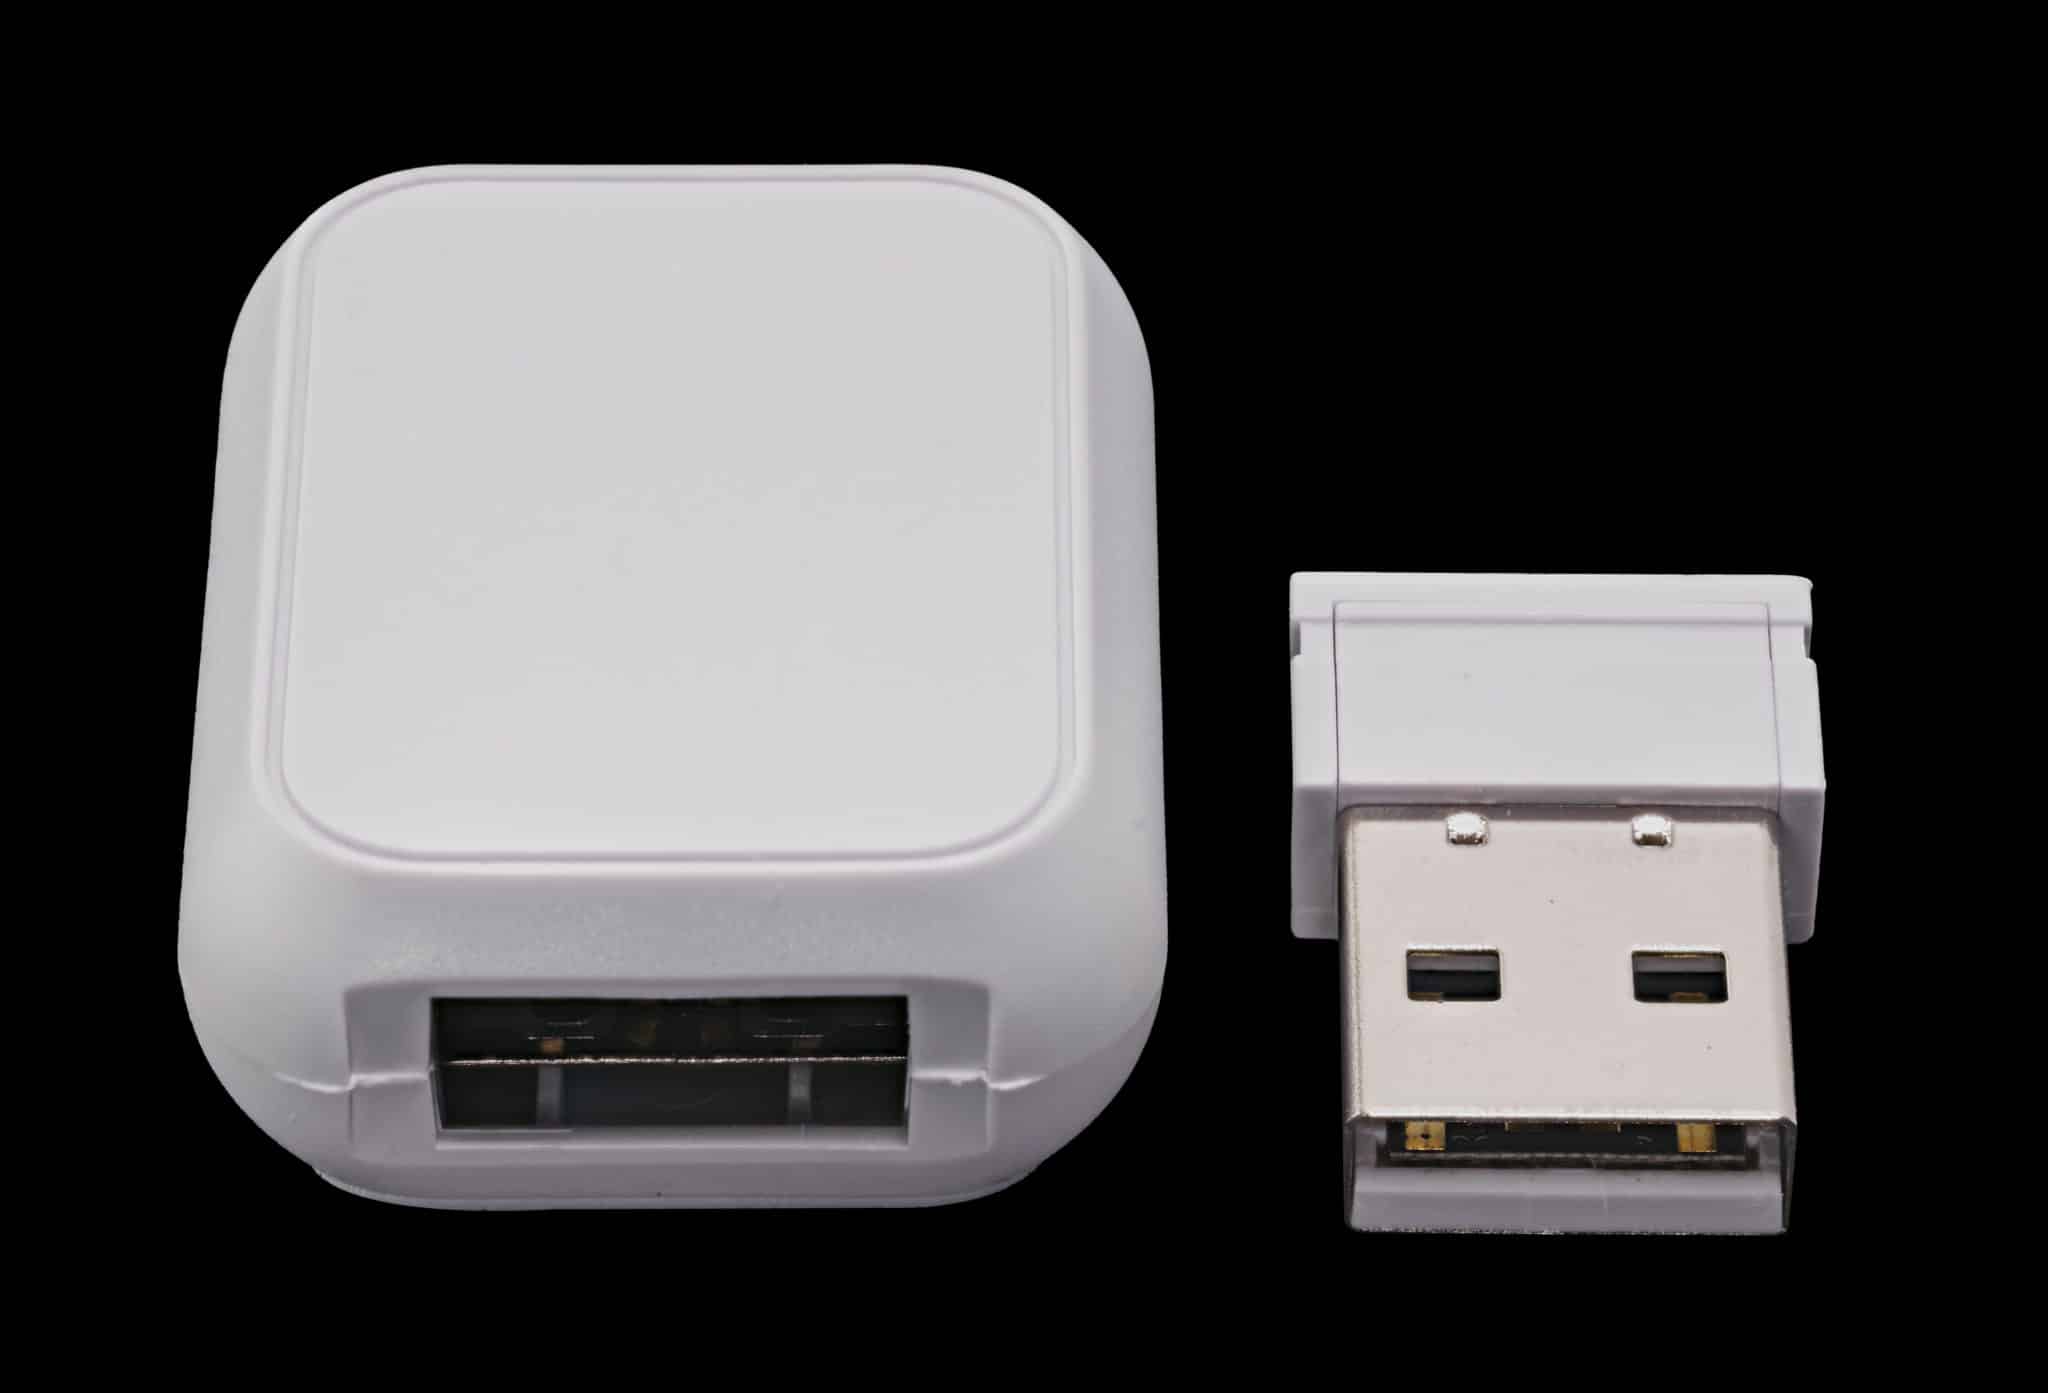 Glorious Model O- Wireless cable coupler and wireless dongle side by side